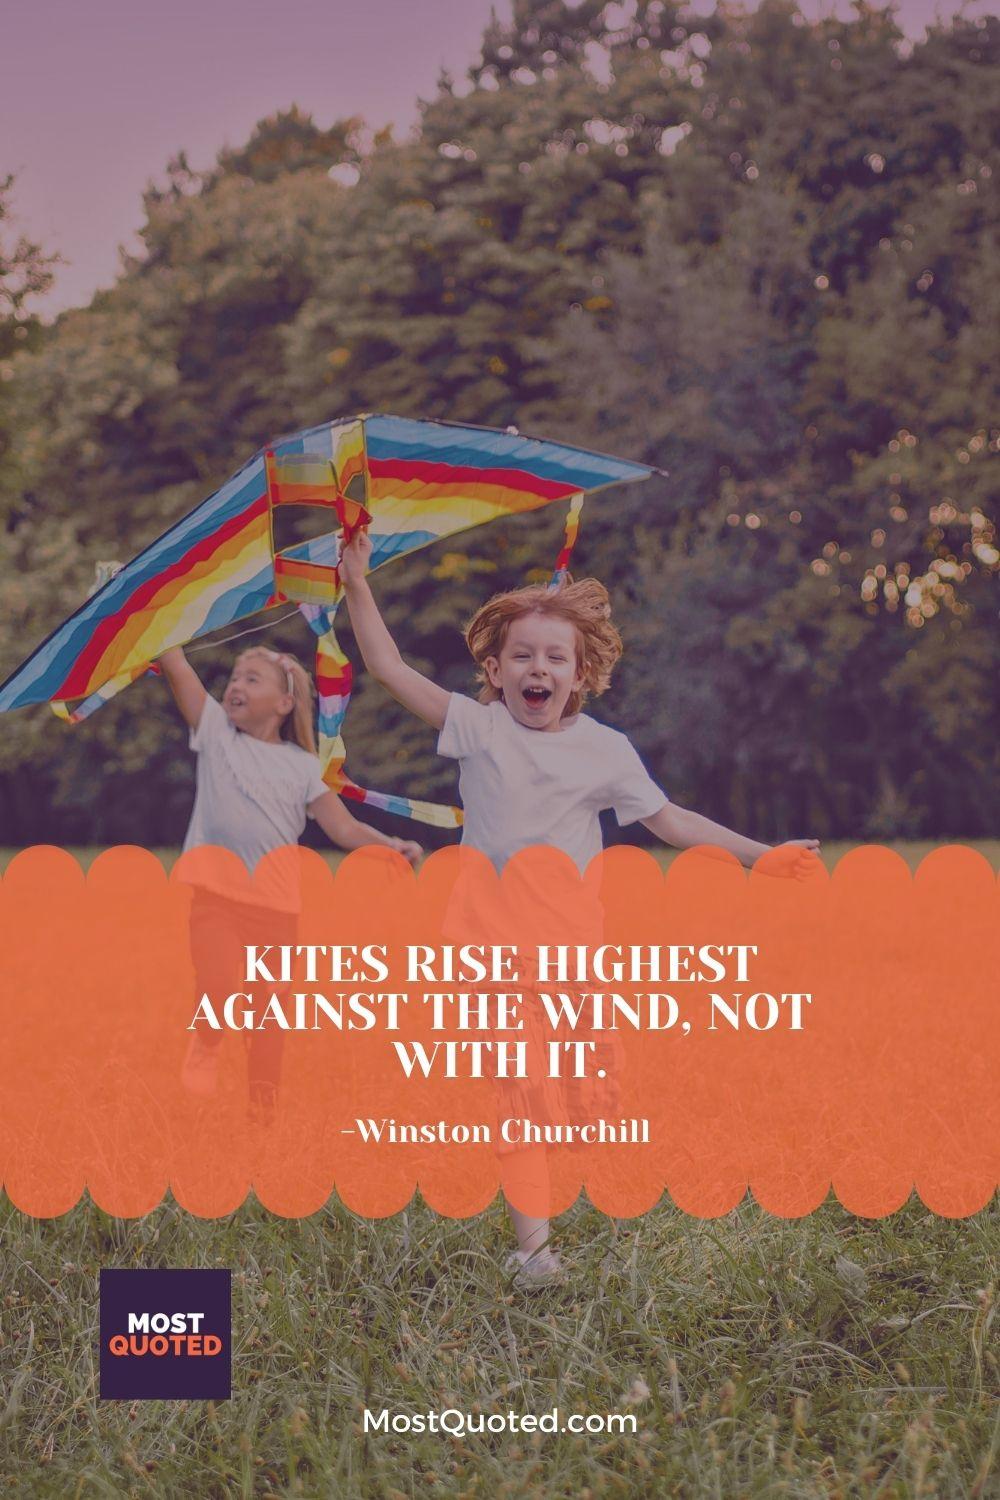 Kites rise highest against the wind, not with it. - Winston Churchill